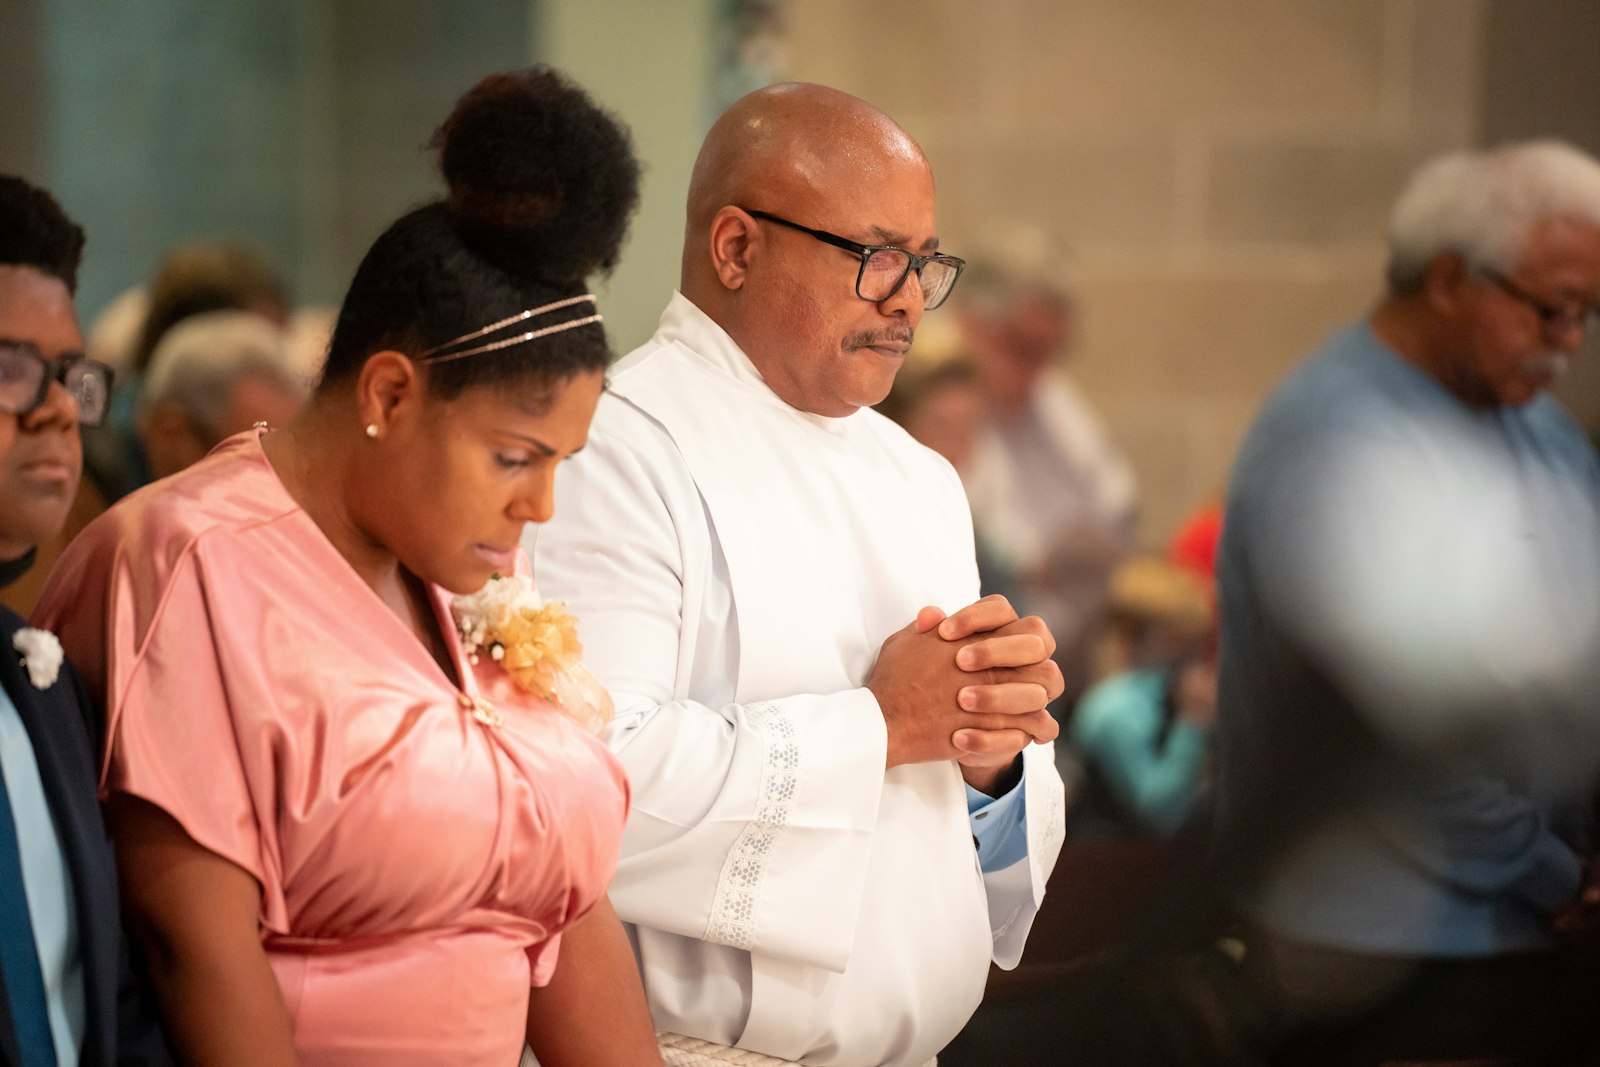 Deacon Sidney Johnson prays next to his wife, Erinn, during the Rite of Ordination of Deacons for the Archdiocese of Detroit on Oct. 1. Erinn Johnson told Detroit Catholic about the formation deacon's wives go through alongside their husbands. Deacon Johnson's first assignment will be at Christ the Redeemer Parish in Lake Orion.